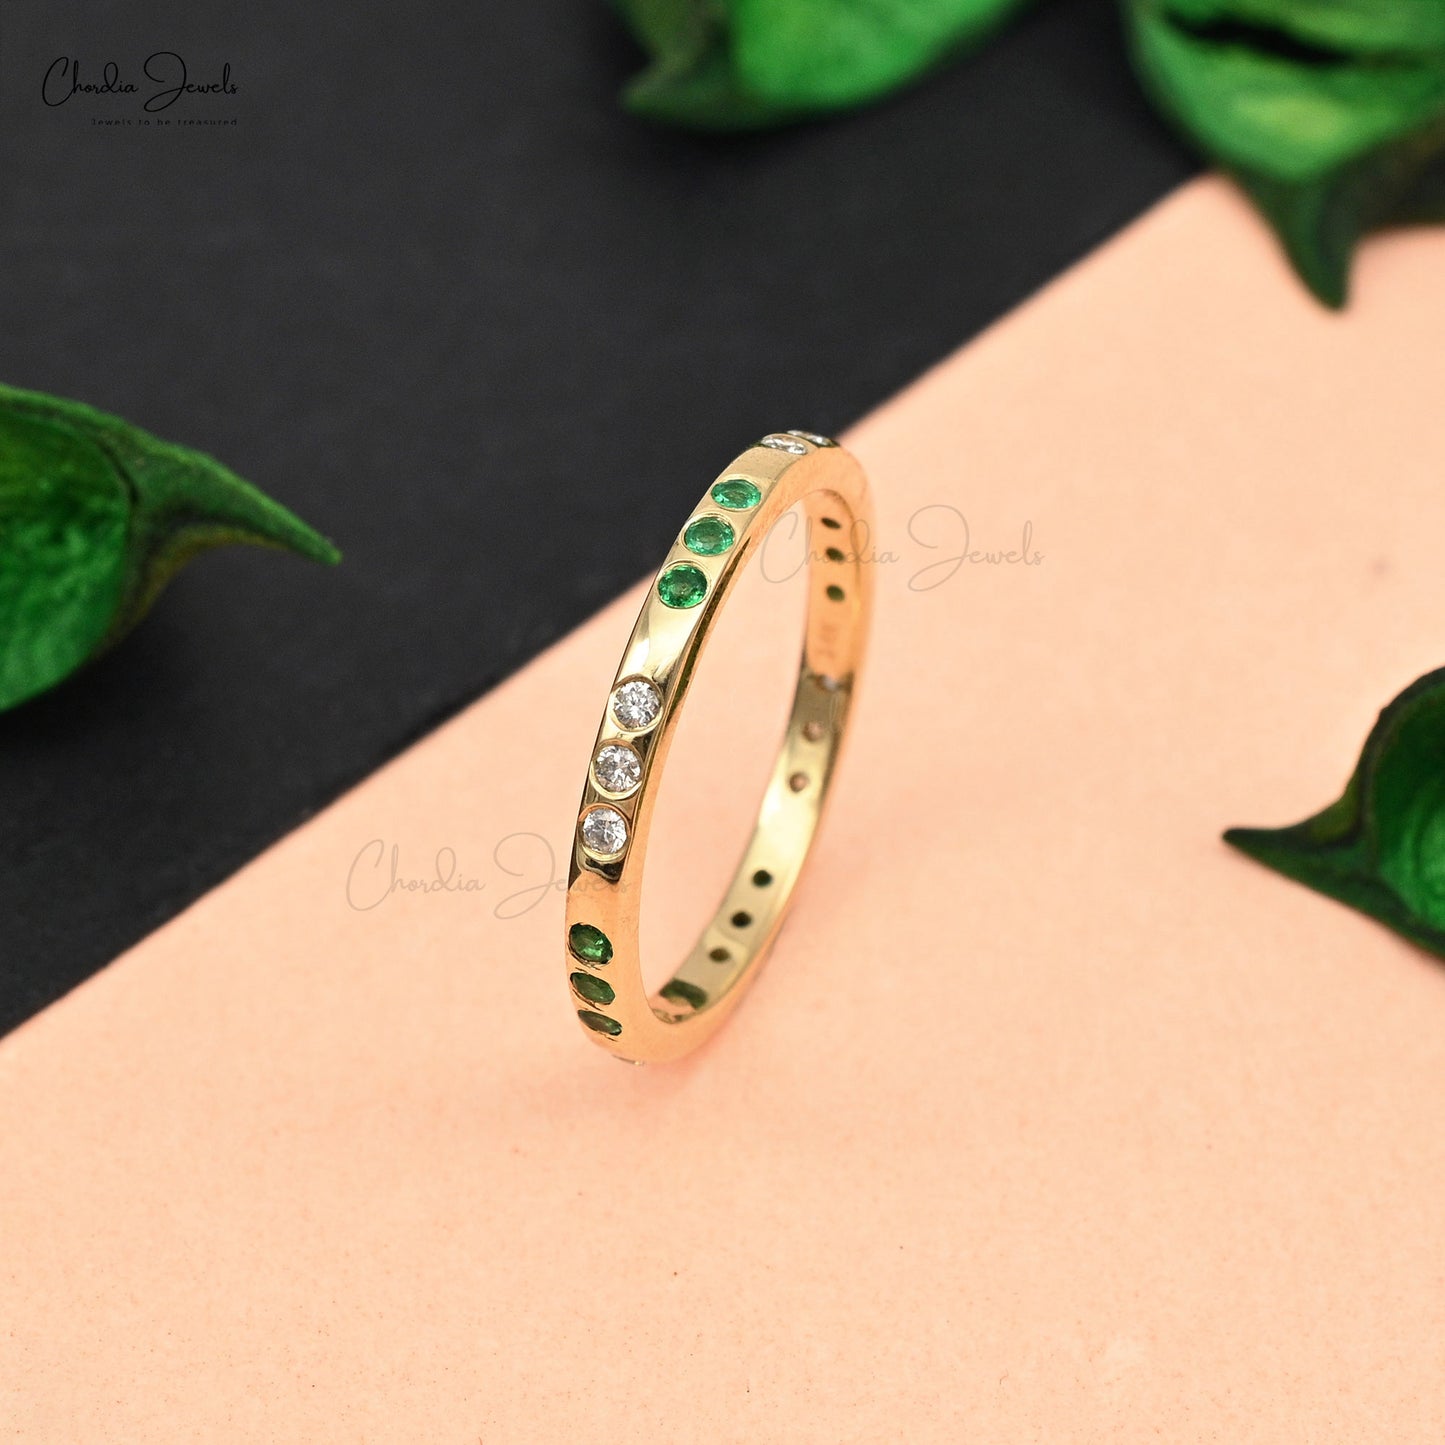 Elevate your elegance with this emerald and diamond ring.